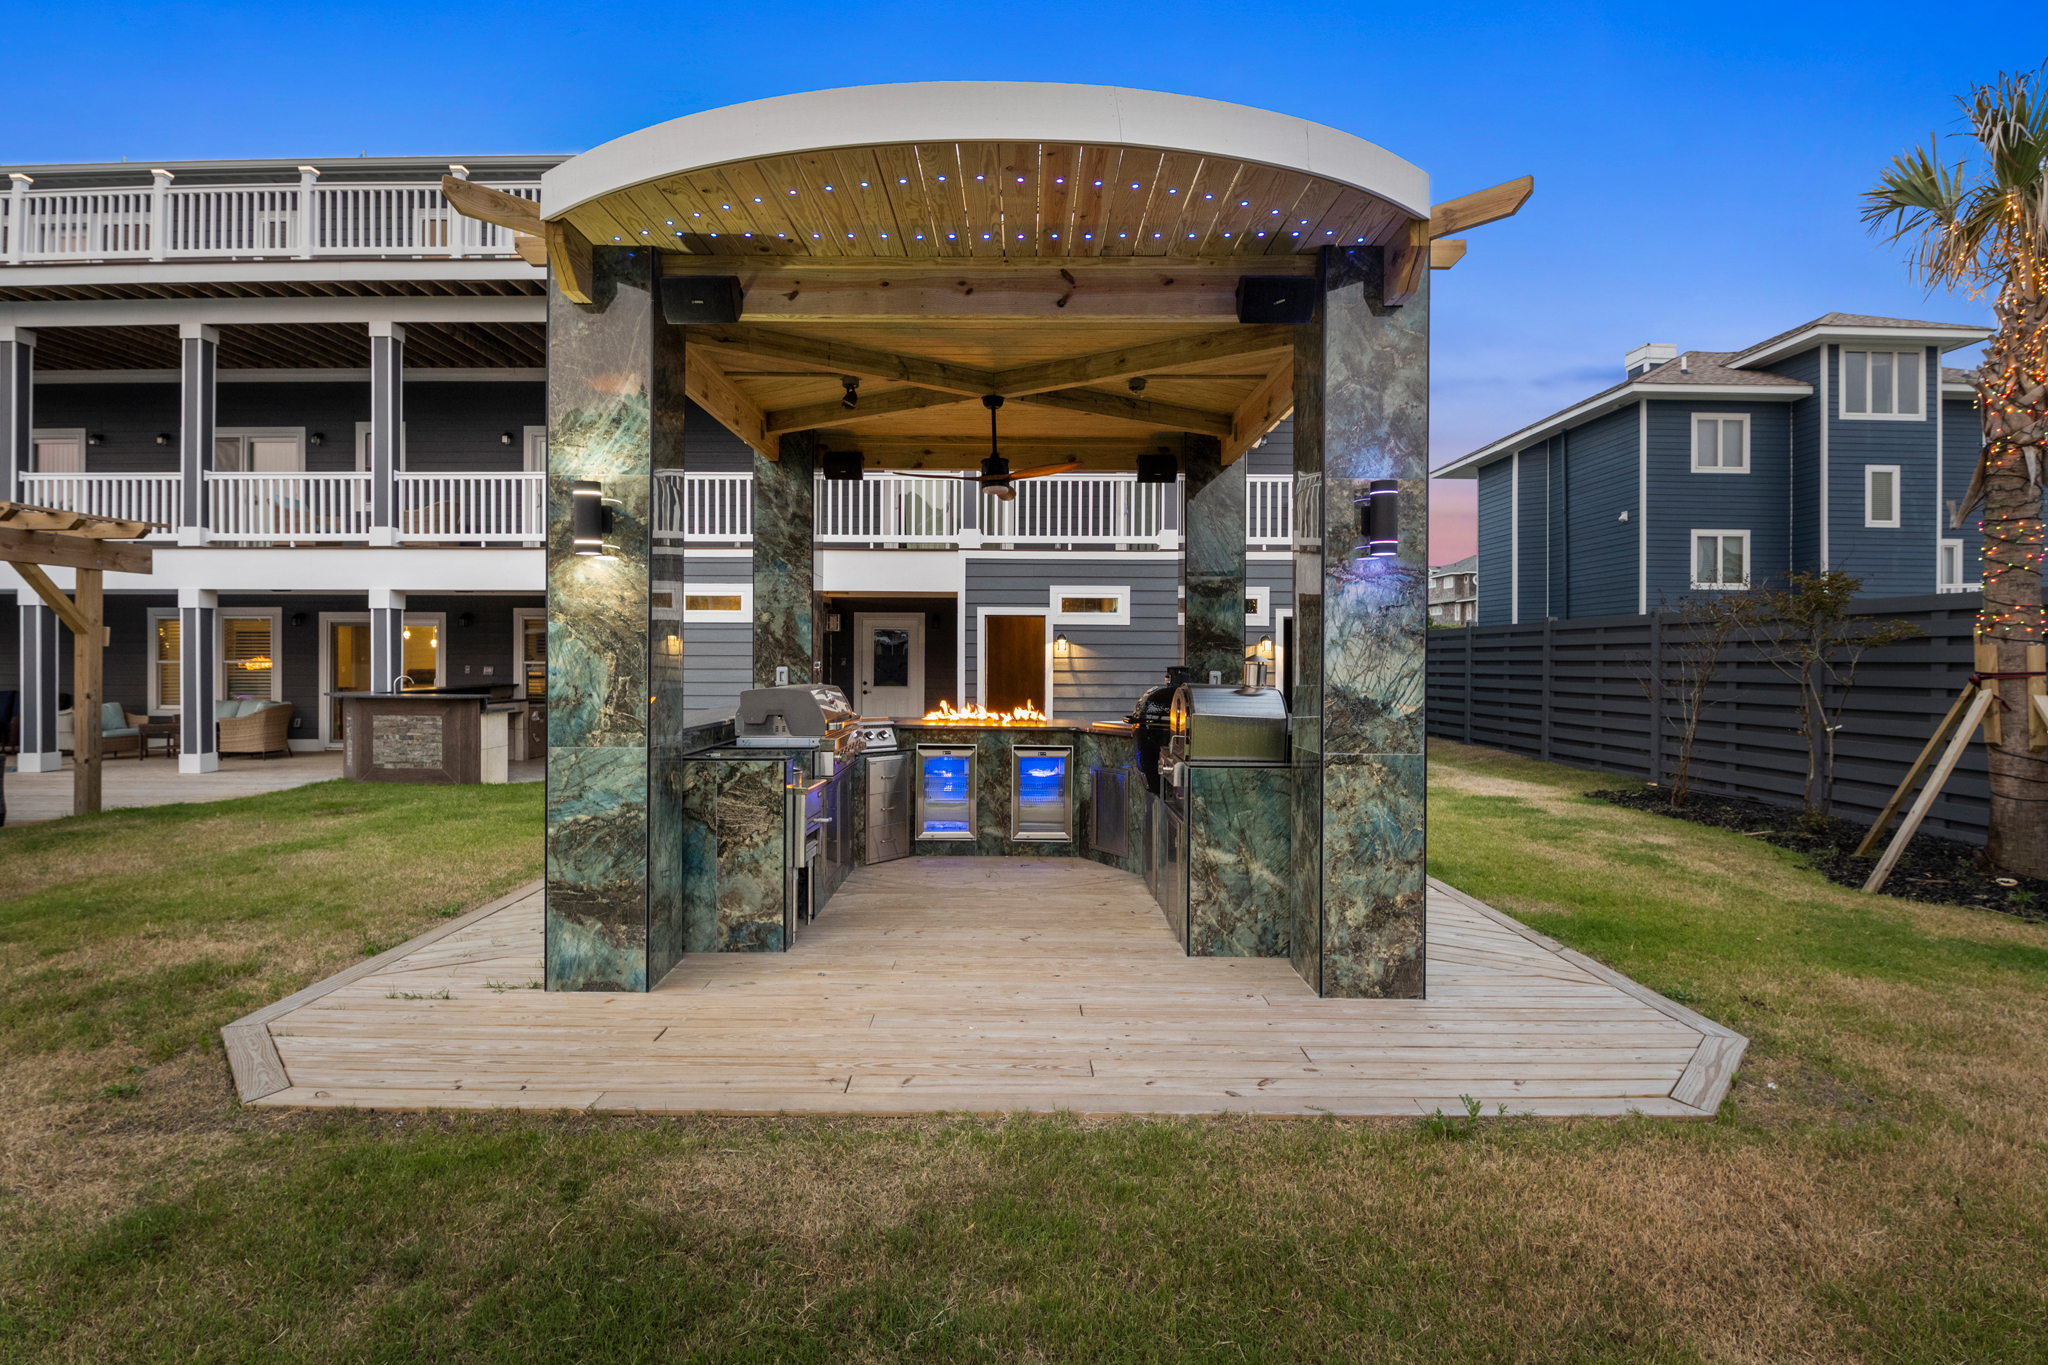 WH786: The OBX One | Backyard Event Space w/ Outdoor Kitchen